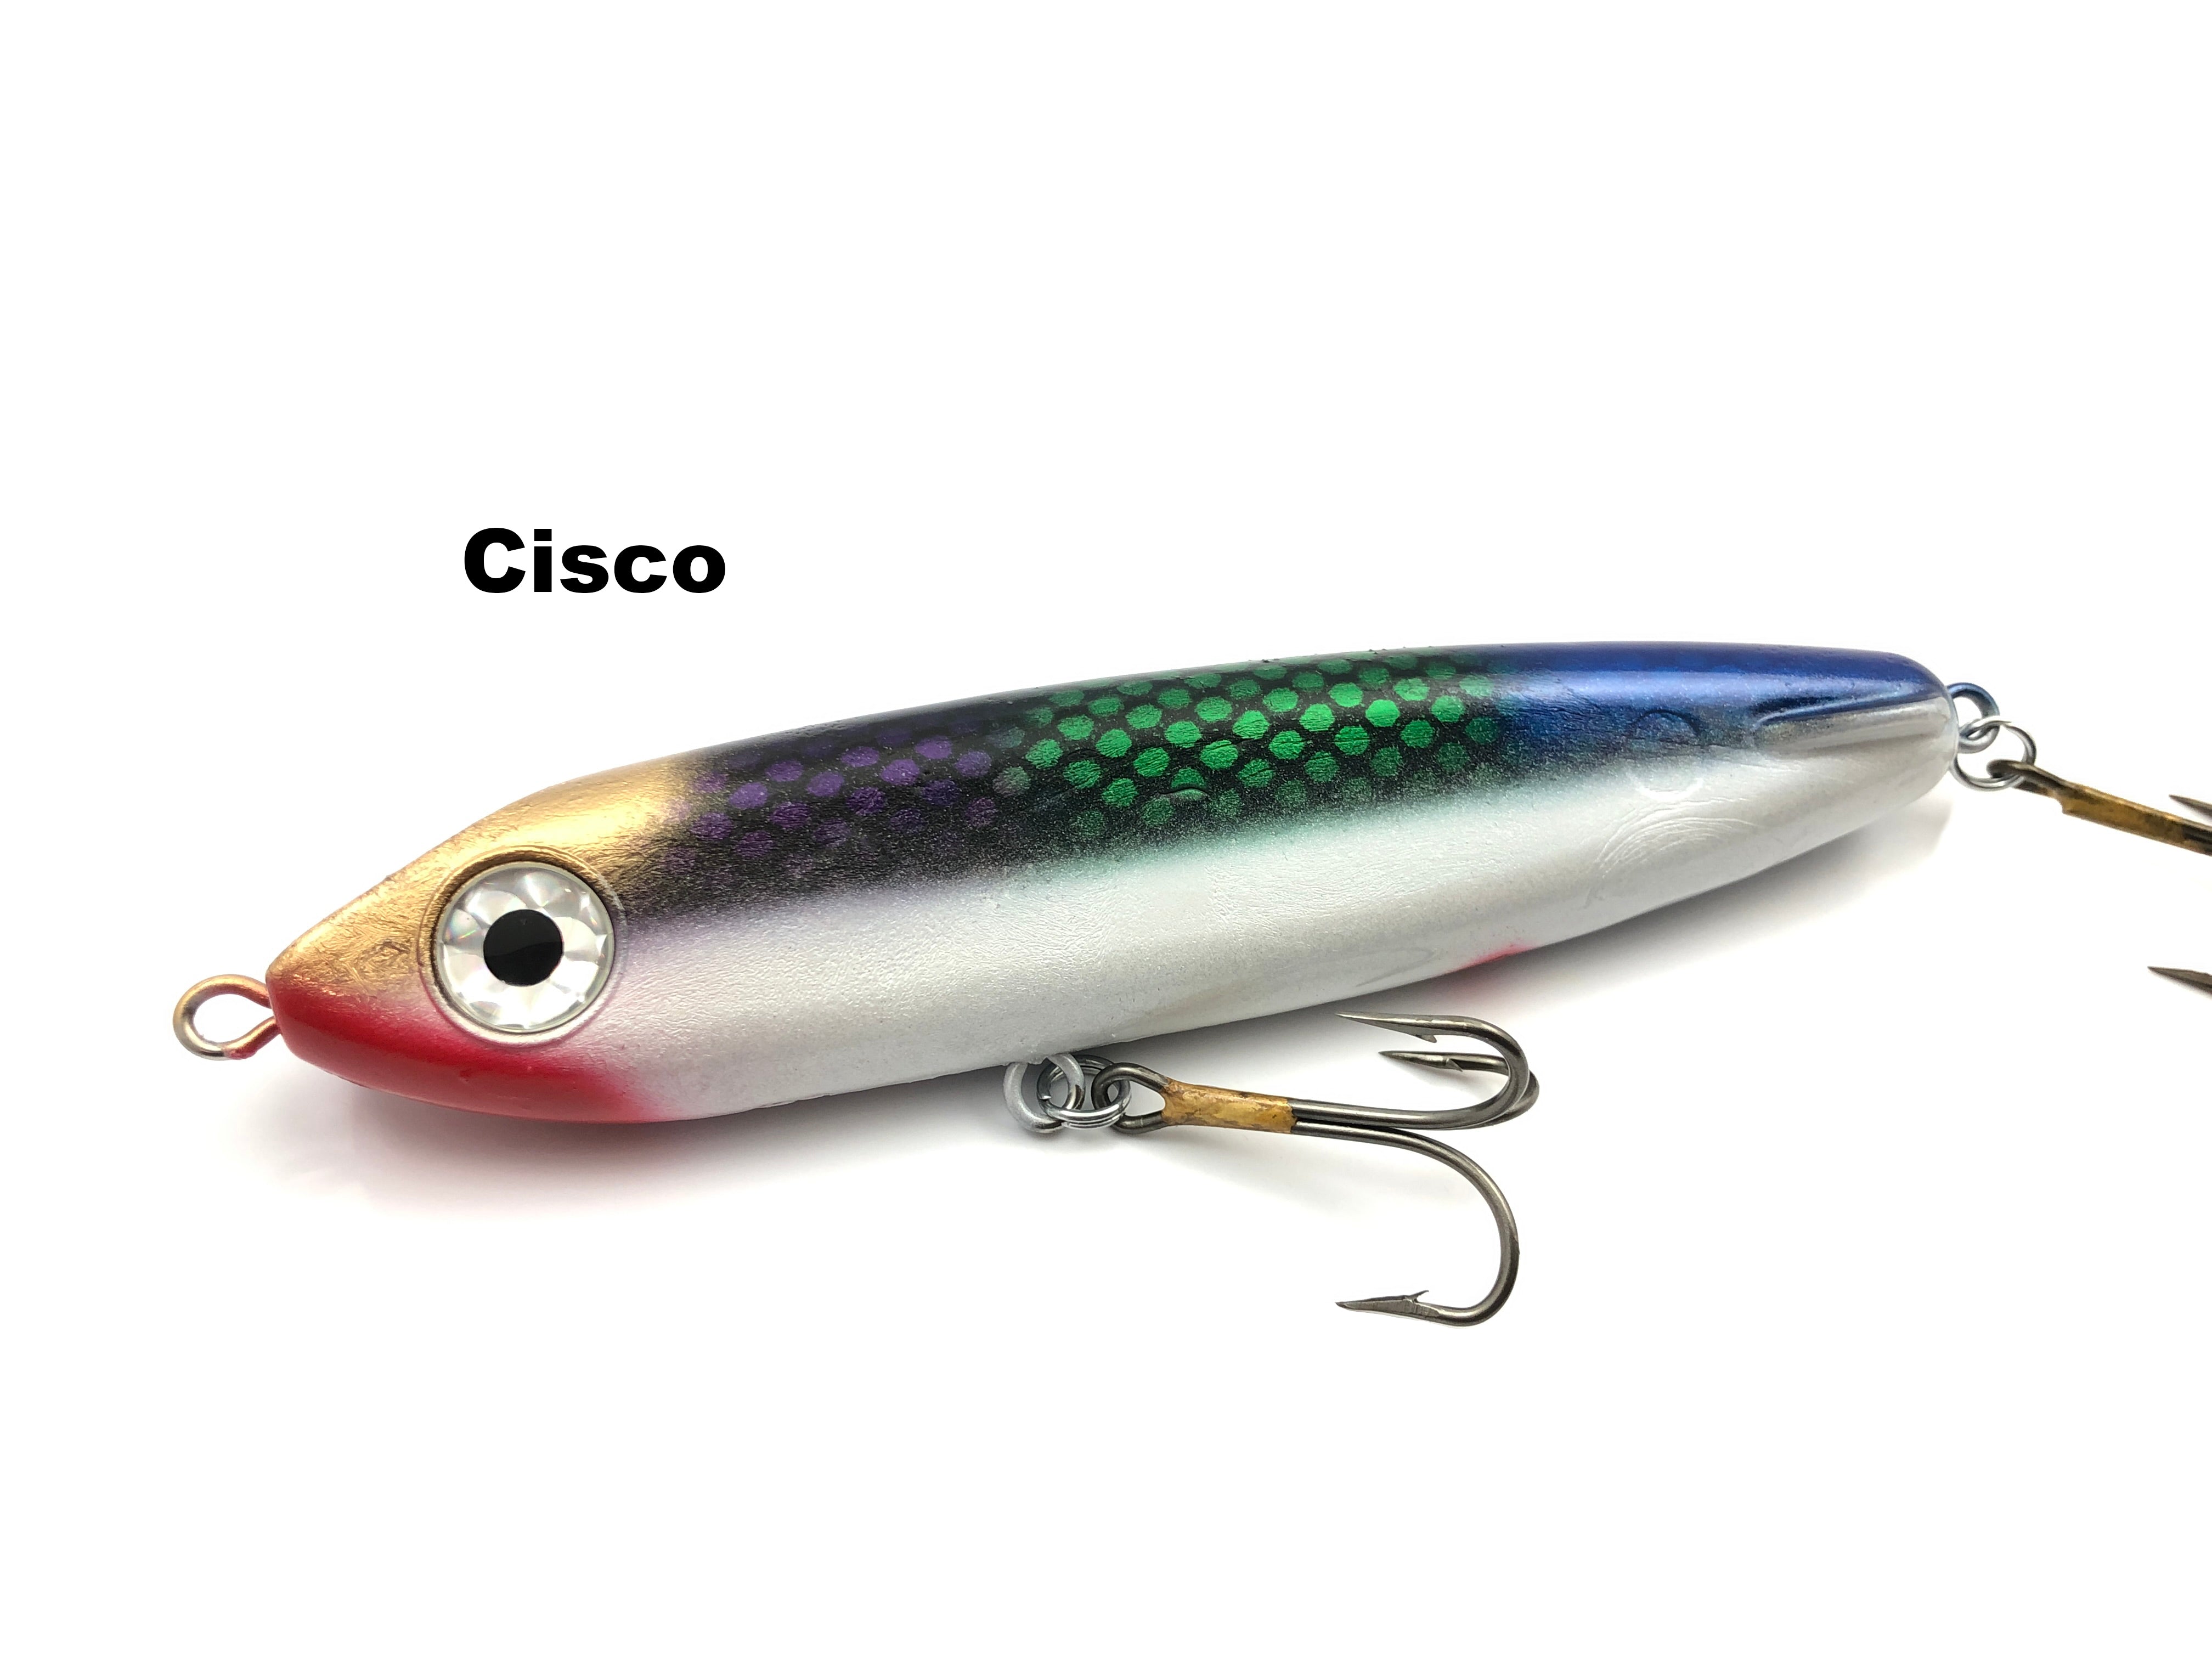 Jerkbaits/Glide Baits – tagged Hell Hound Musky Fishing Lure